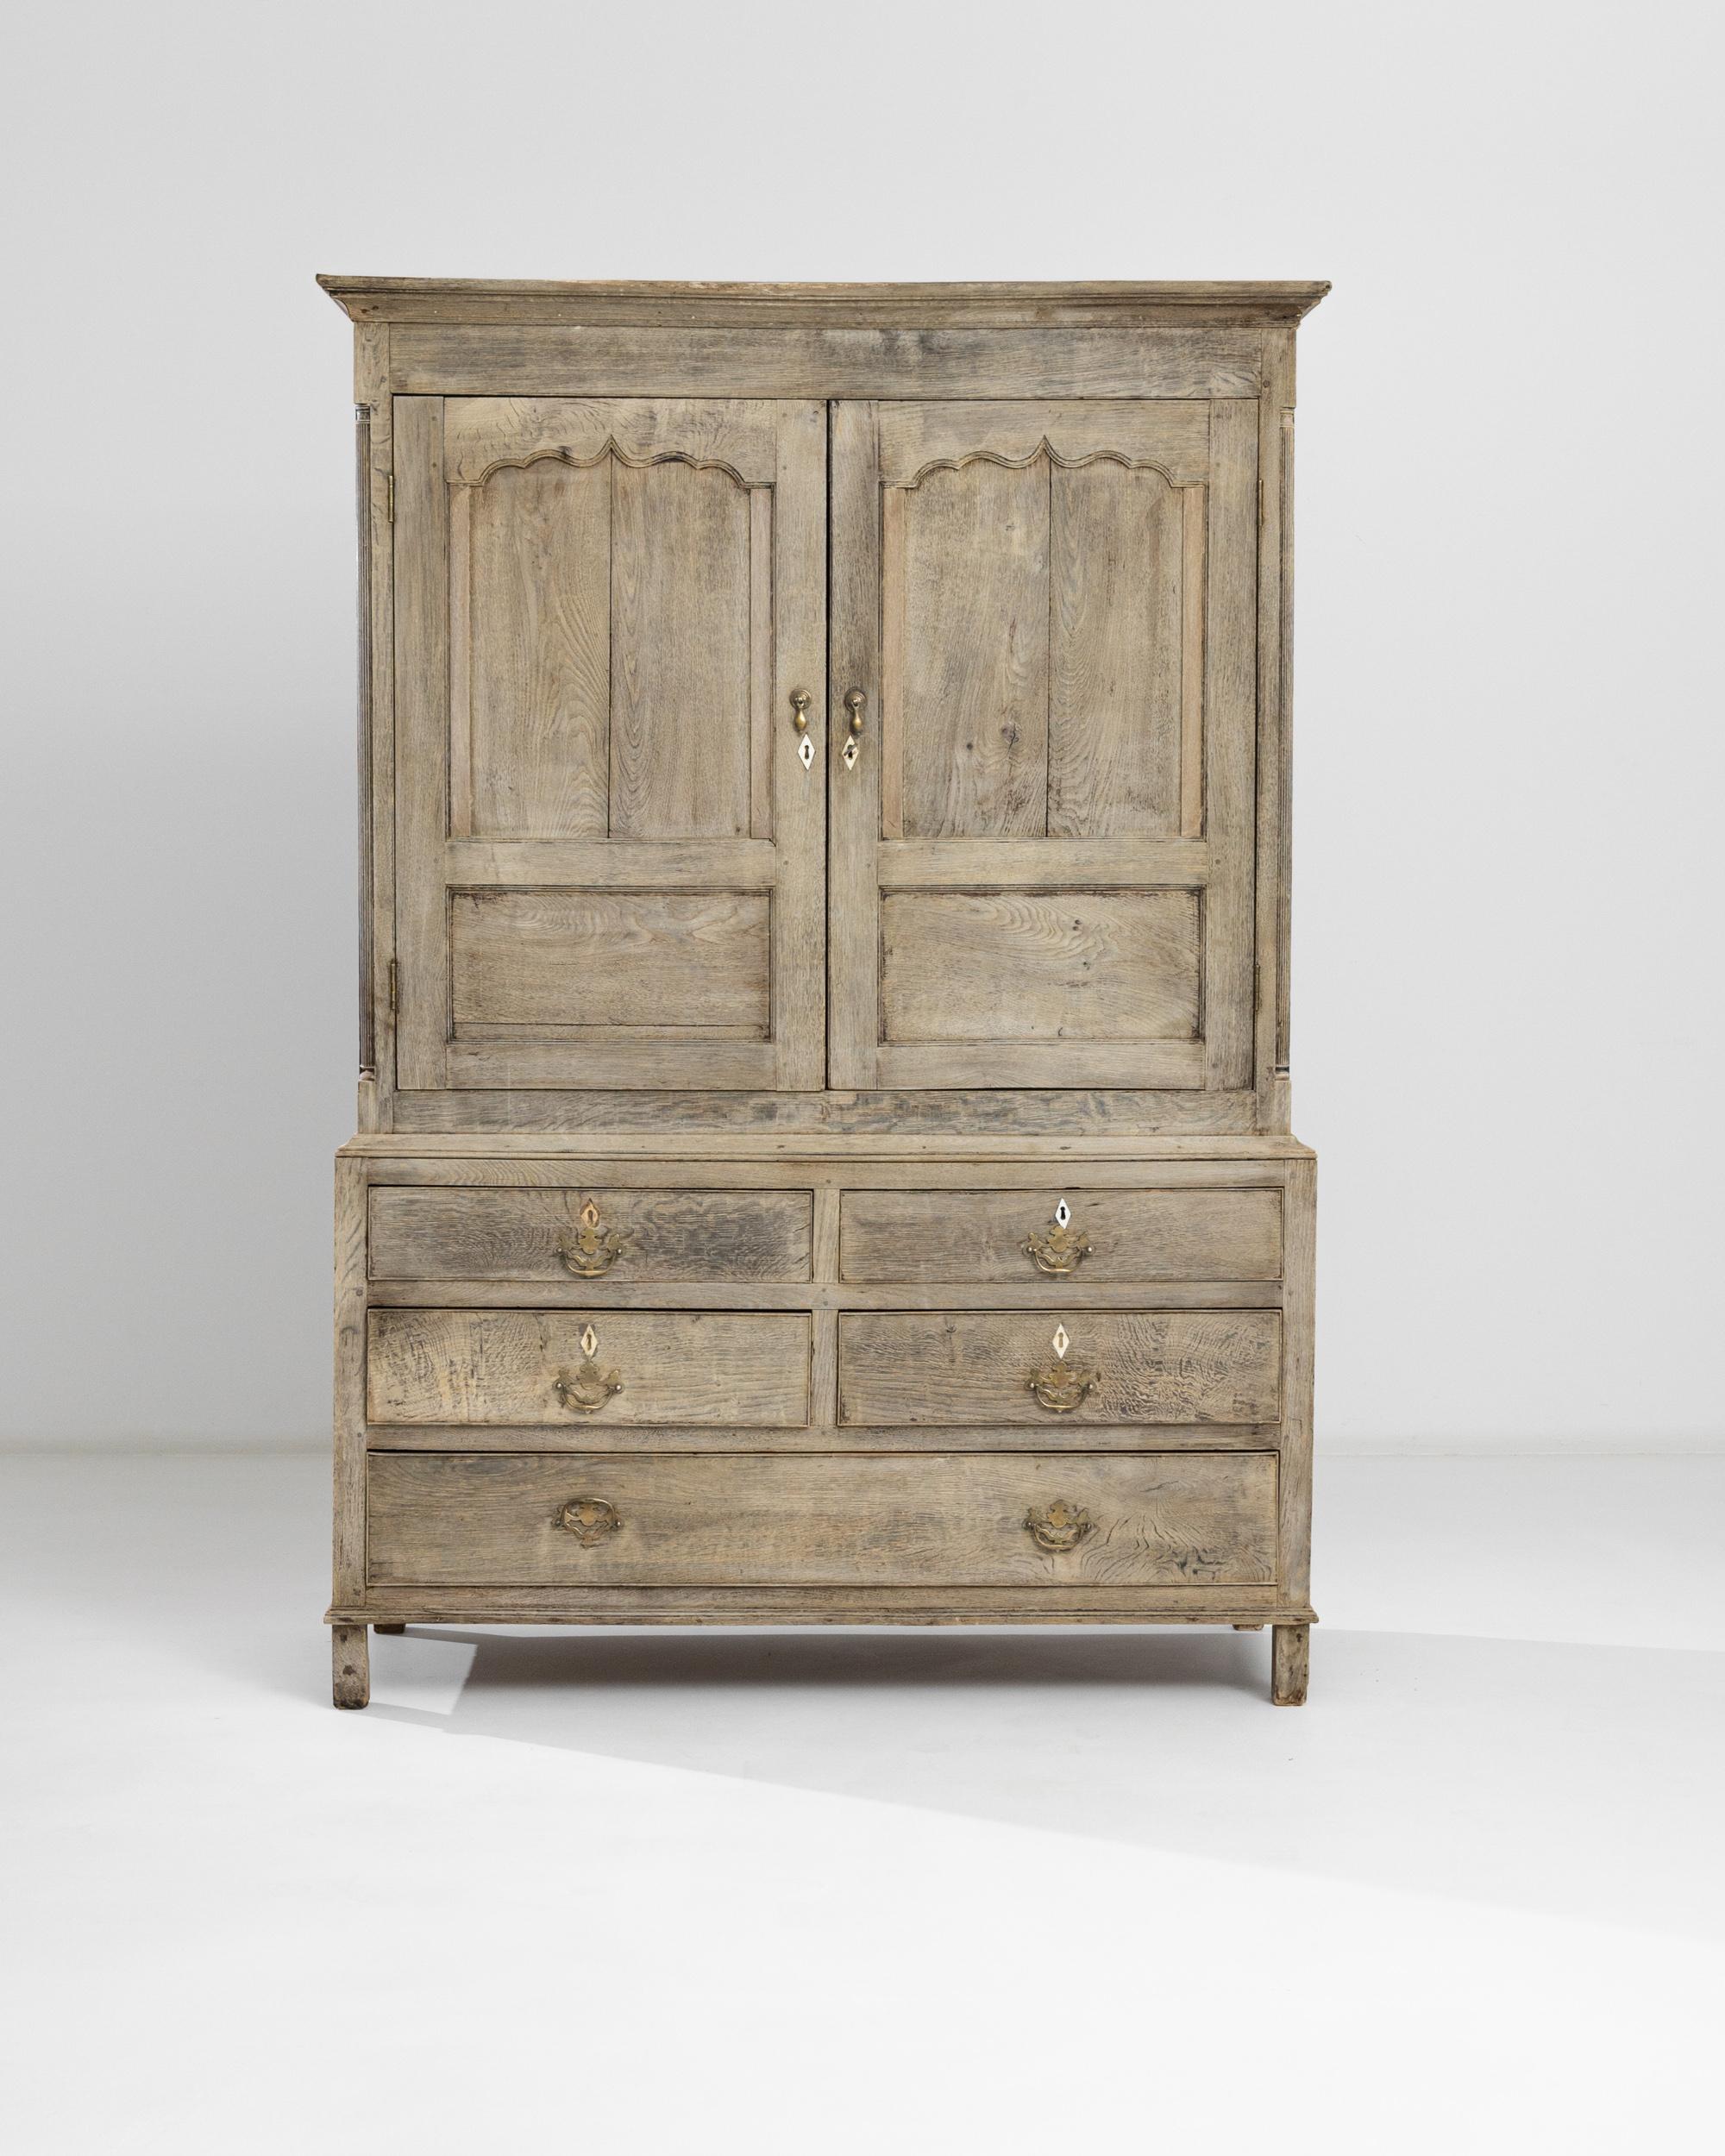 This robust oak cabinet was made in the UK circa 1800. Its deux-corps anatomy provides a spacious upper compartment with two raised doors decorated with boldly carved arches and a lower section with five drawers. The presence of the pale finish is